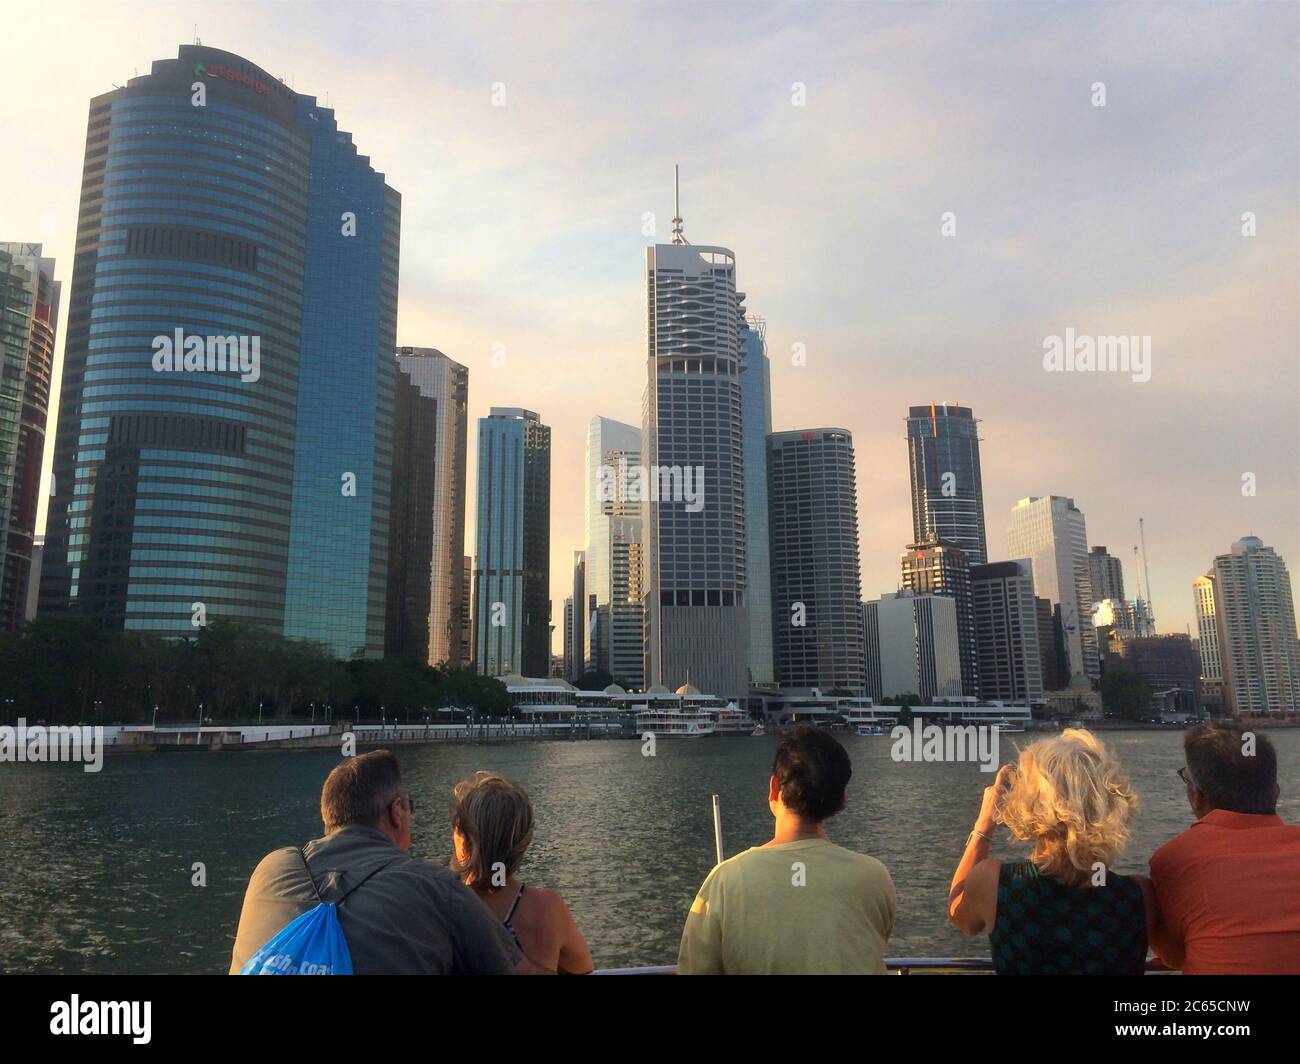 Brisbane, Queensland, Australia - 15th February 2020 : Rear view of some people on the CityCat ferry looking at the city skyline of Brisbane, Australi Stock Photo